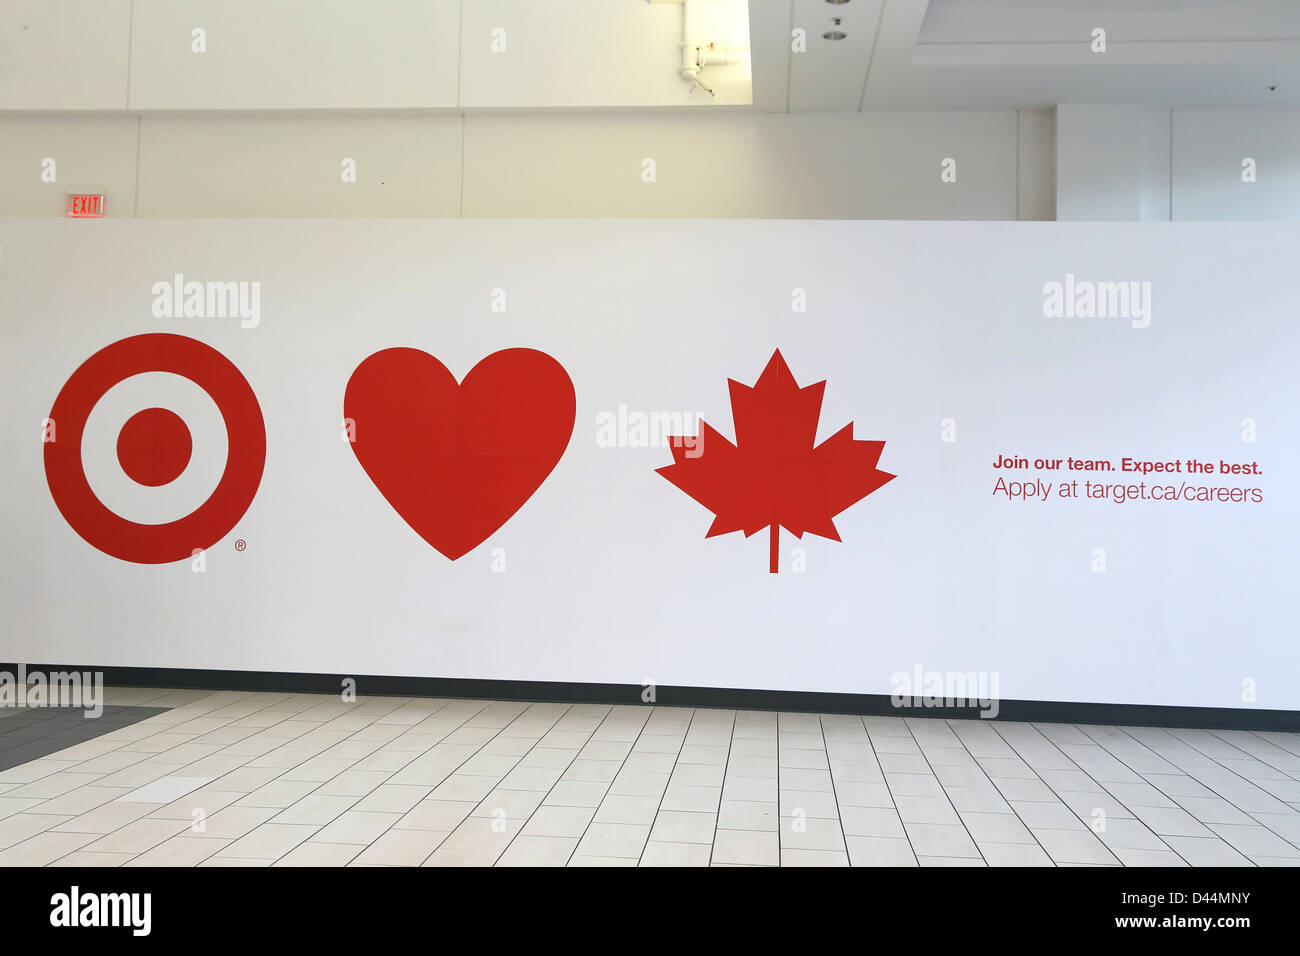 Target hiring sign in mall Stock Photo